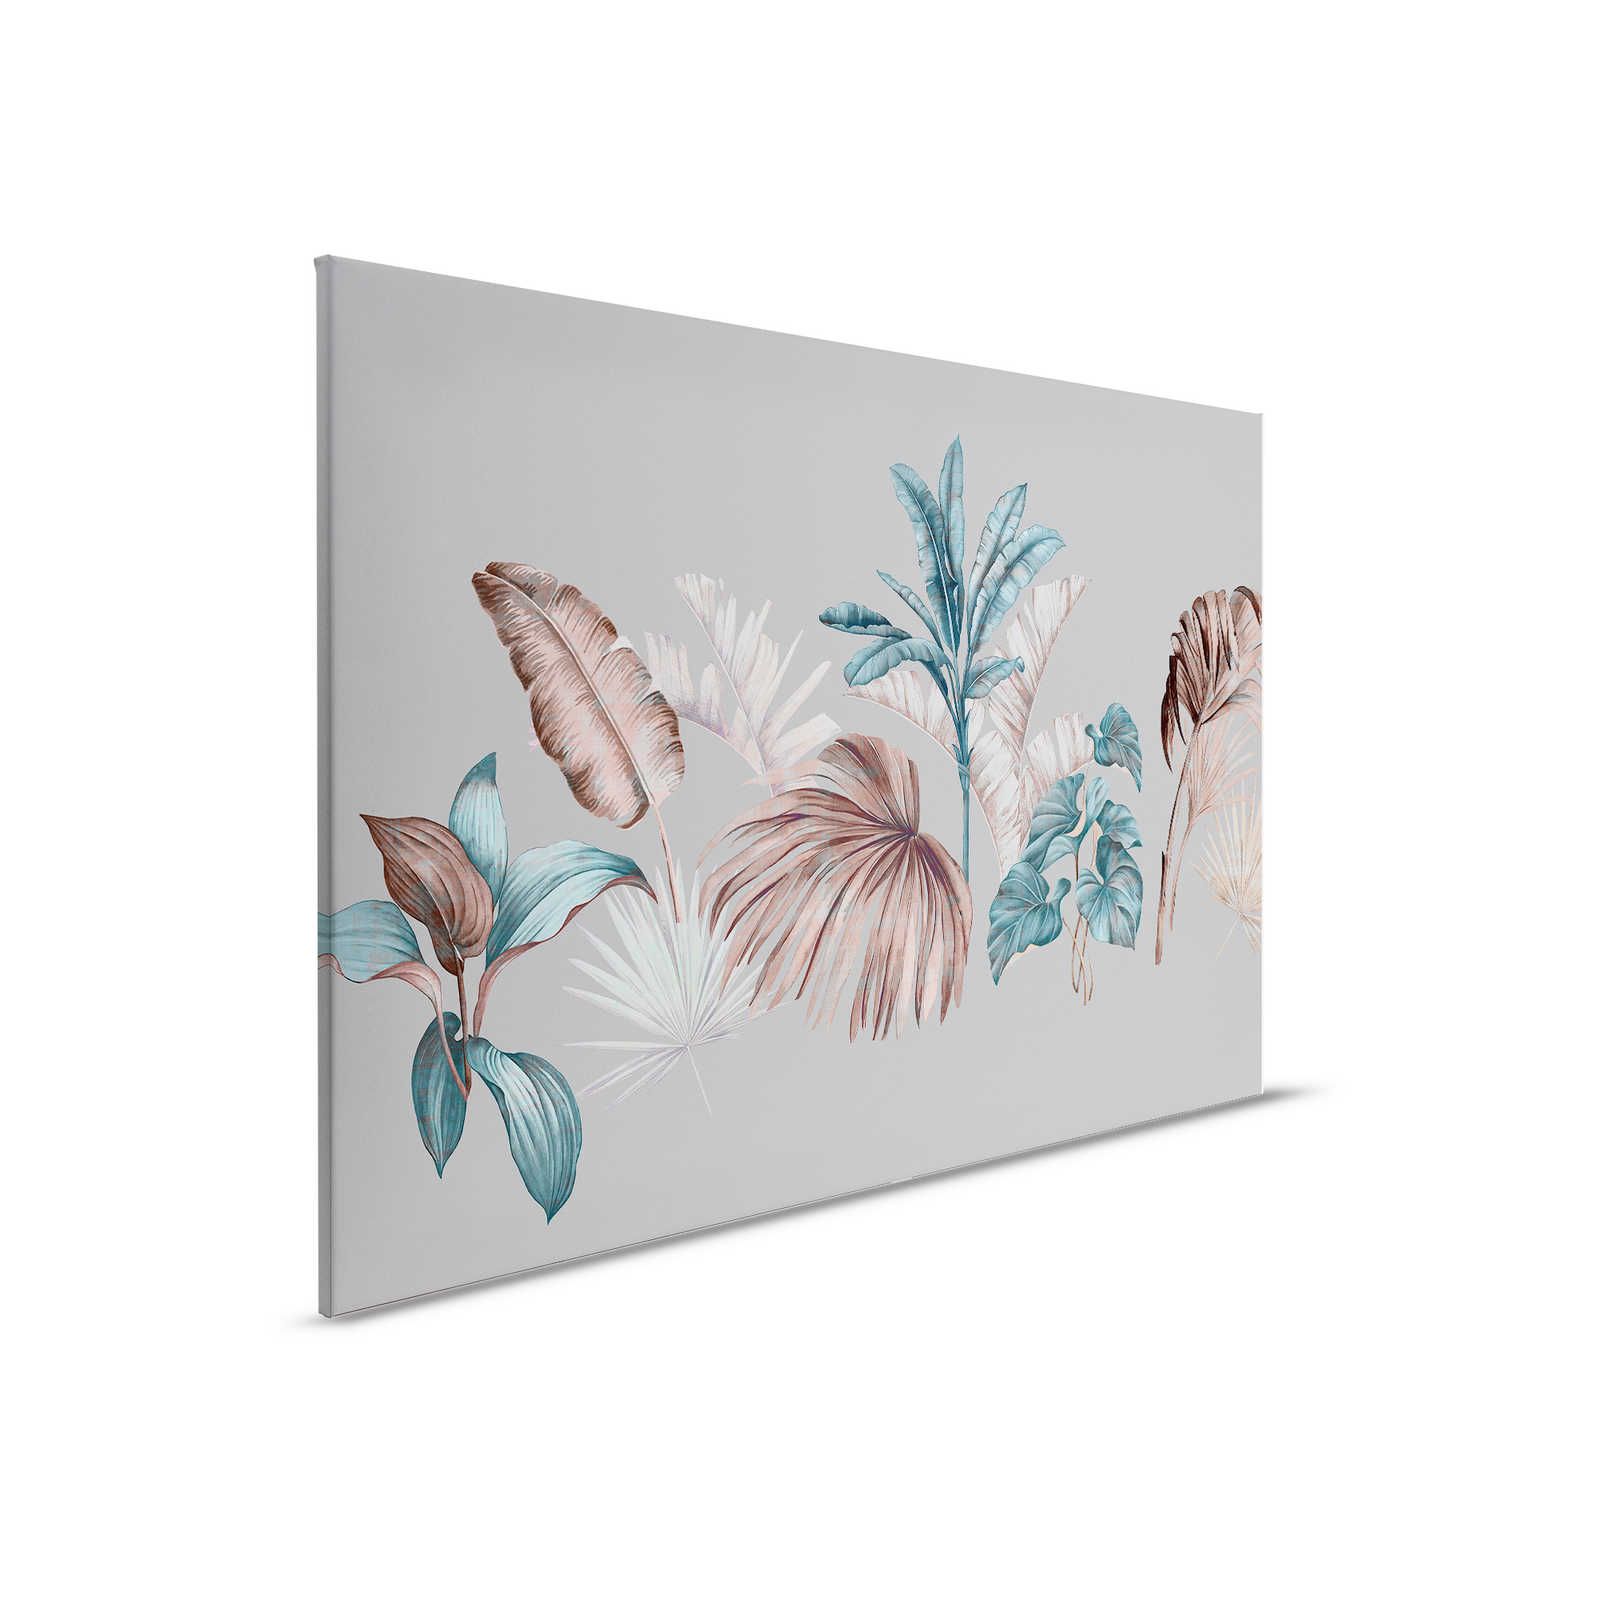         Brasilia 1 - Grey Canvas Painting Tropical Leaves in Petrol & Copper - 0.90 m x 0.60 m
    